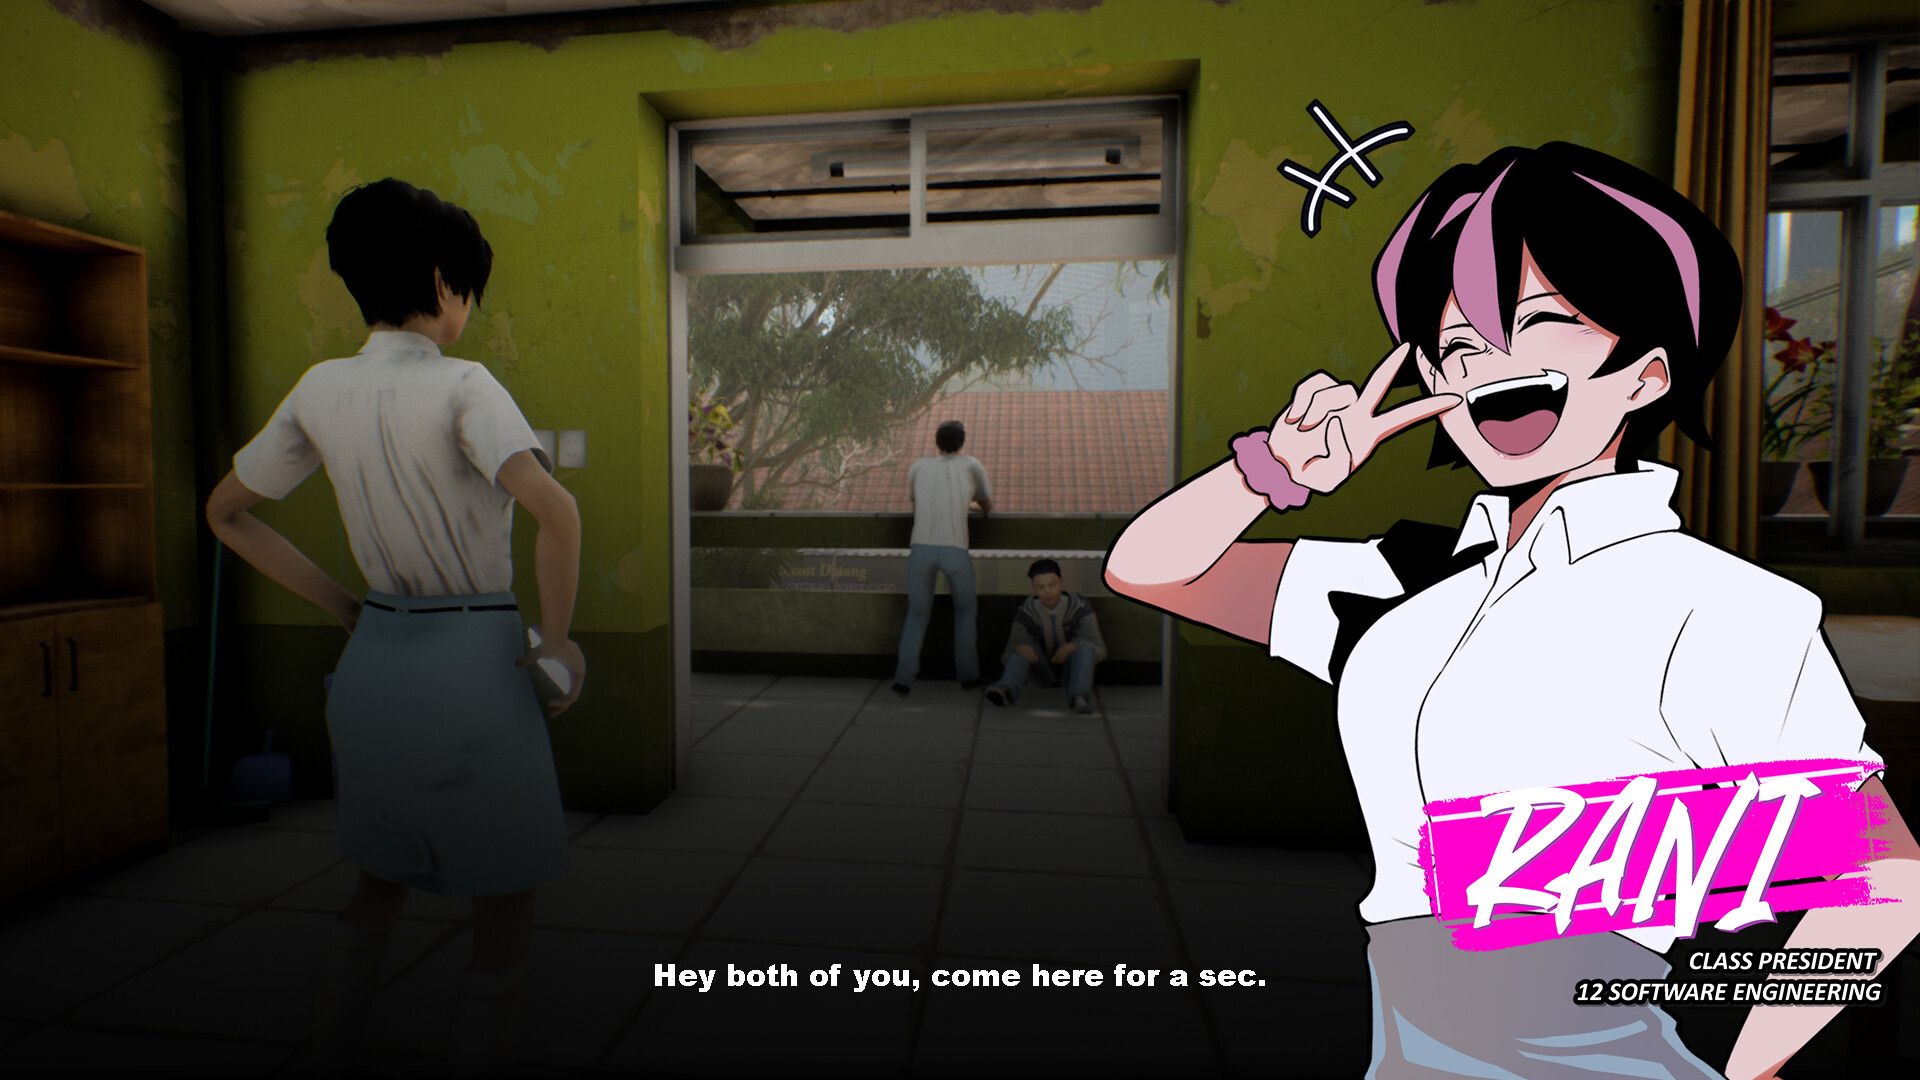 Screenshot of the game. Rani, the class president, asks Budi and another student to come talk to her.